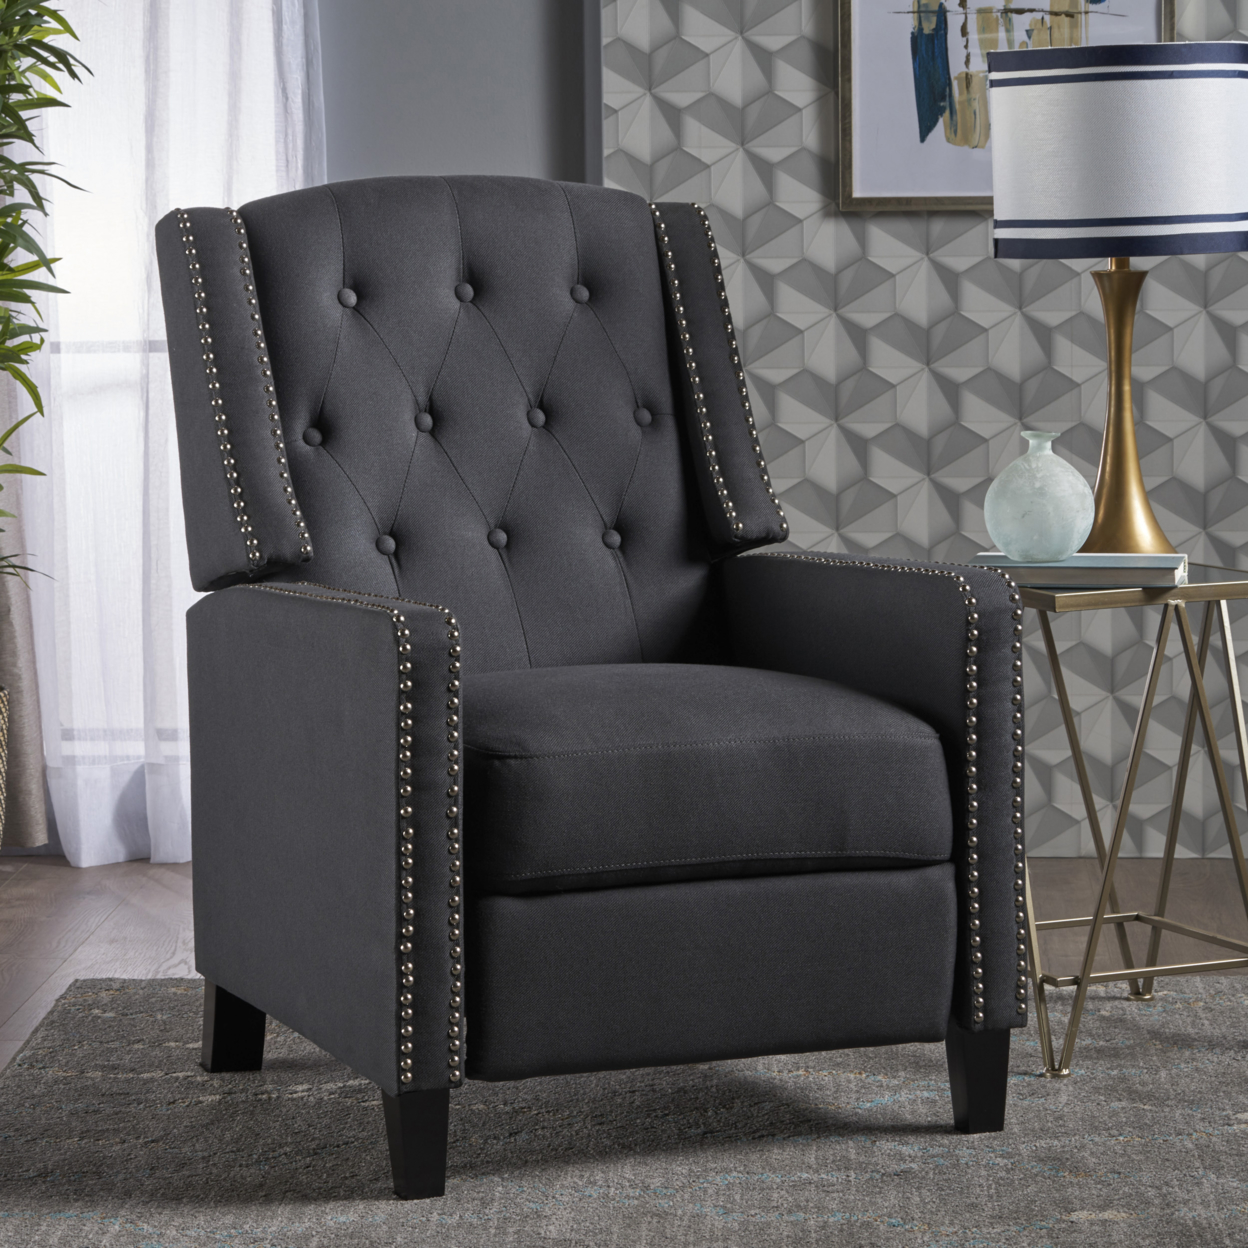 Ingrid Tufted Back Fabric Recliner Chair - Dark Charcoal